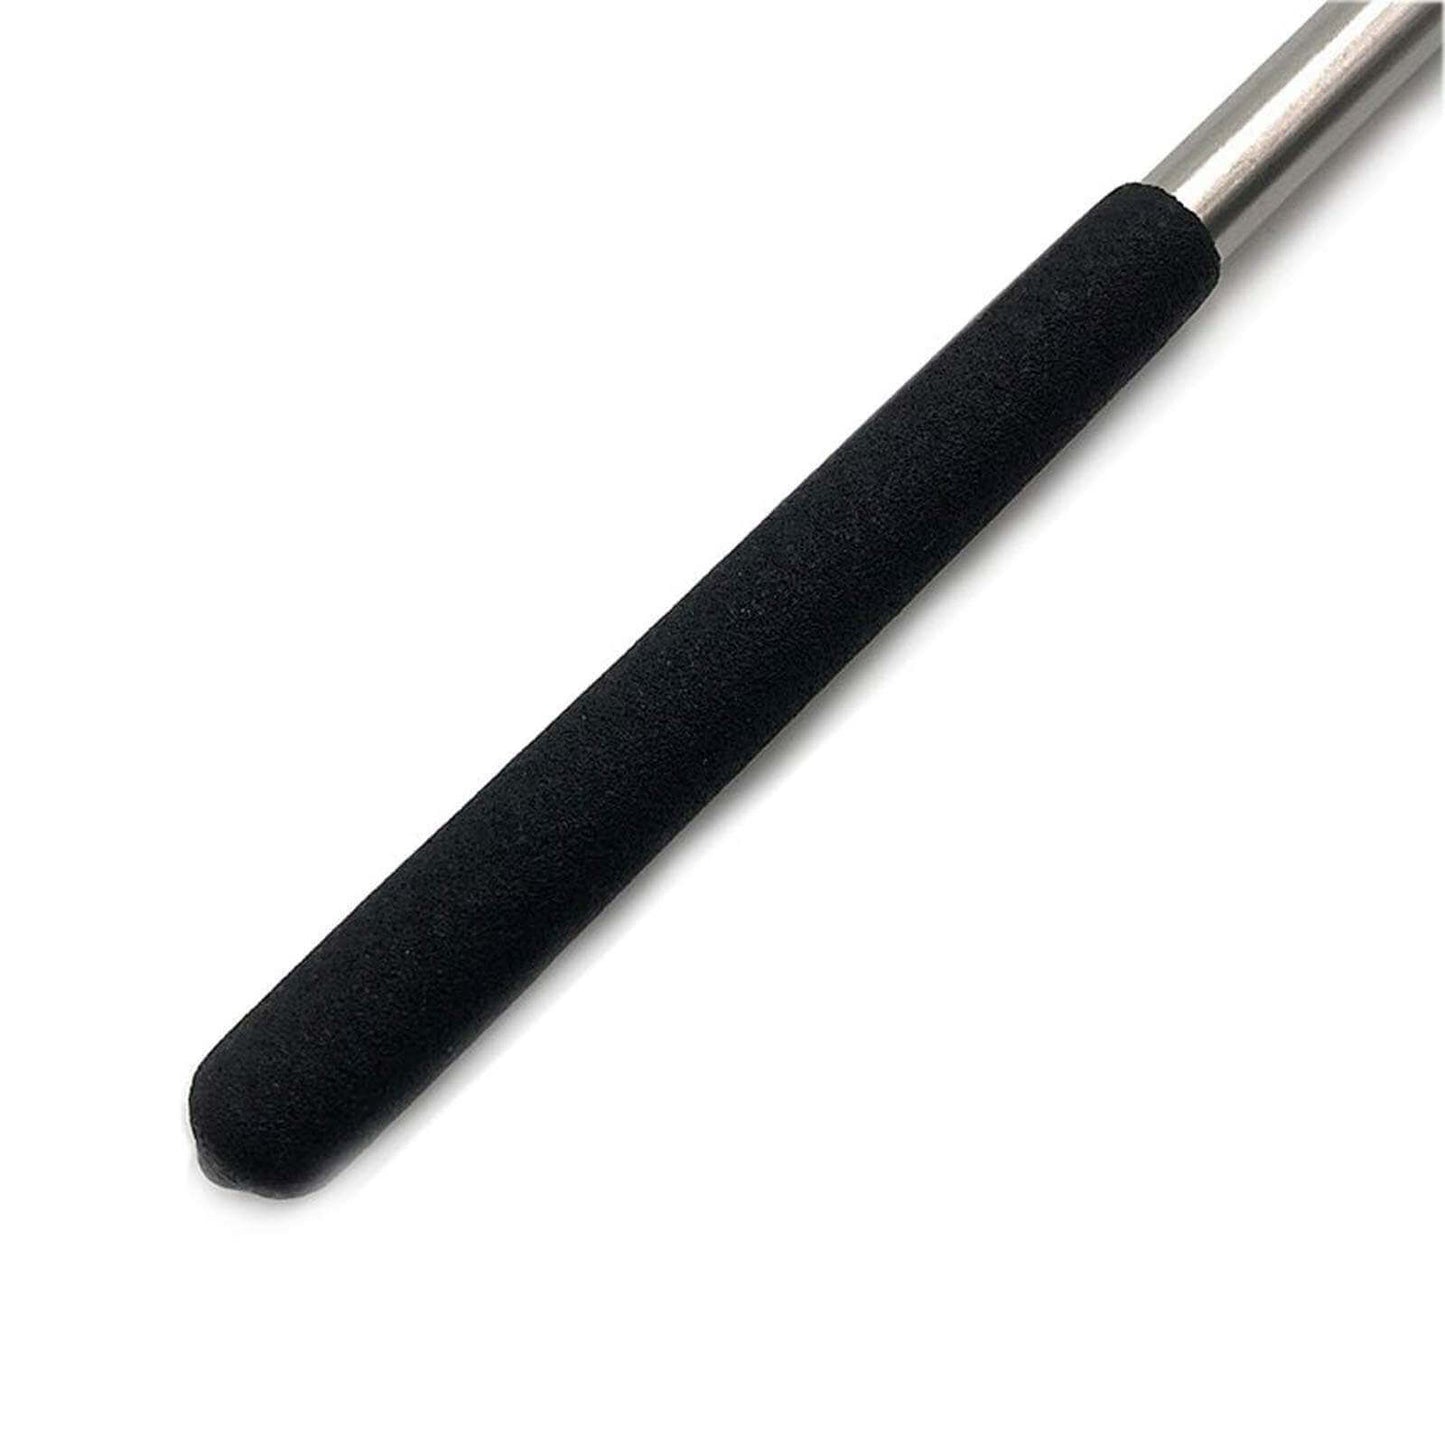 Telescopic Shoe Horn by Fanwer with Extendable Stainless Steel Handle, the handle part